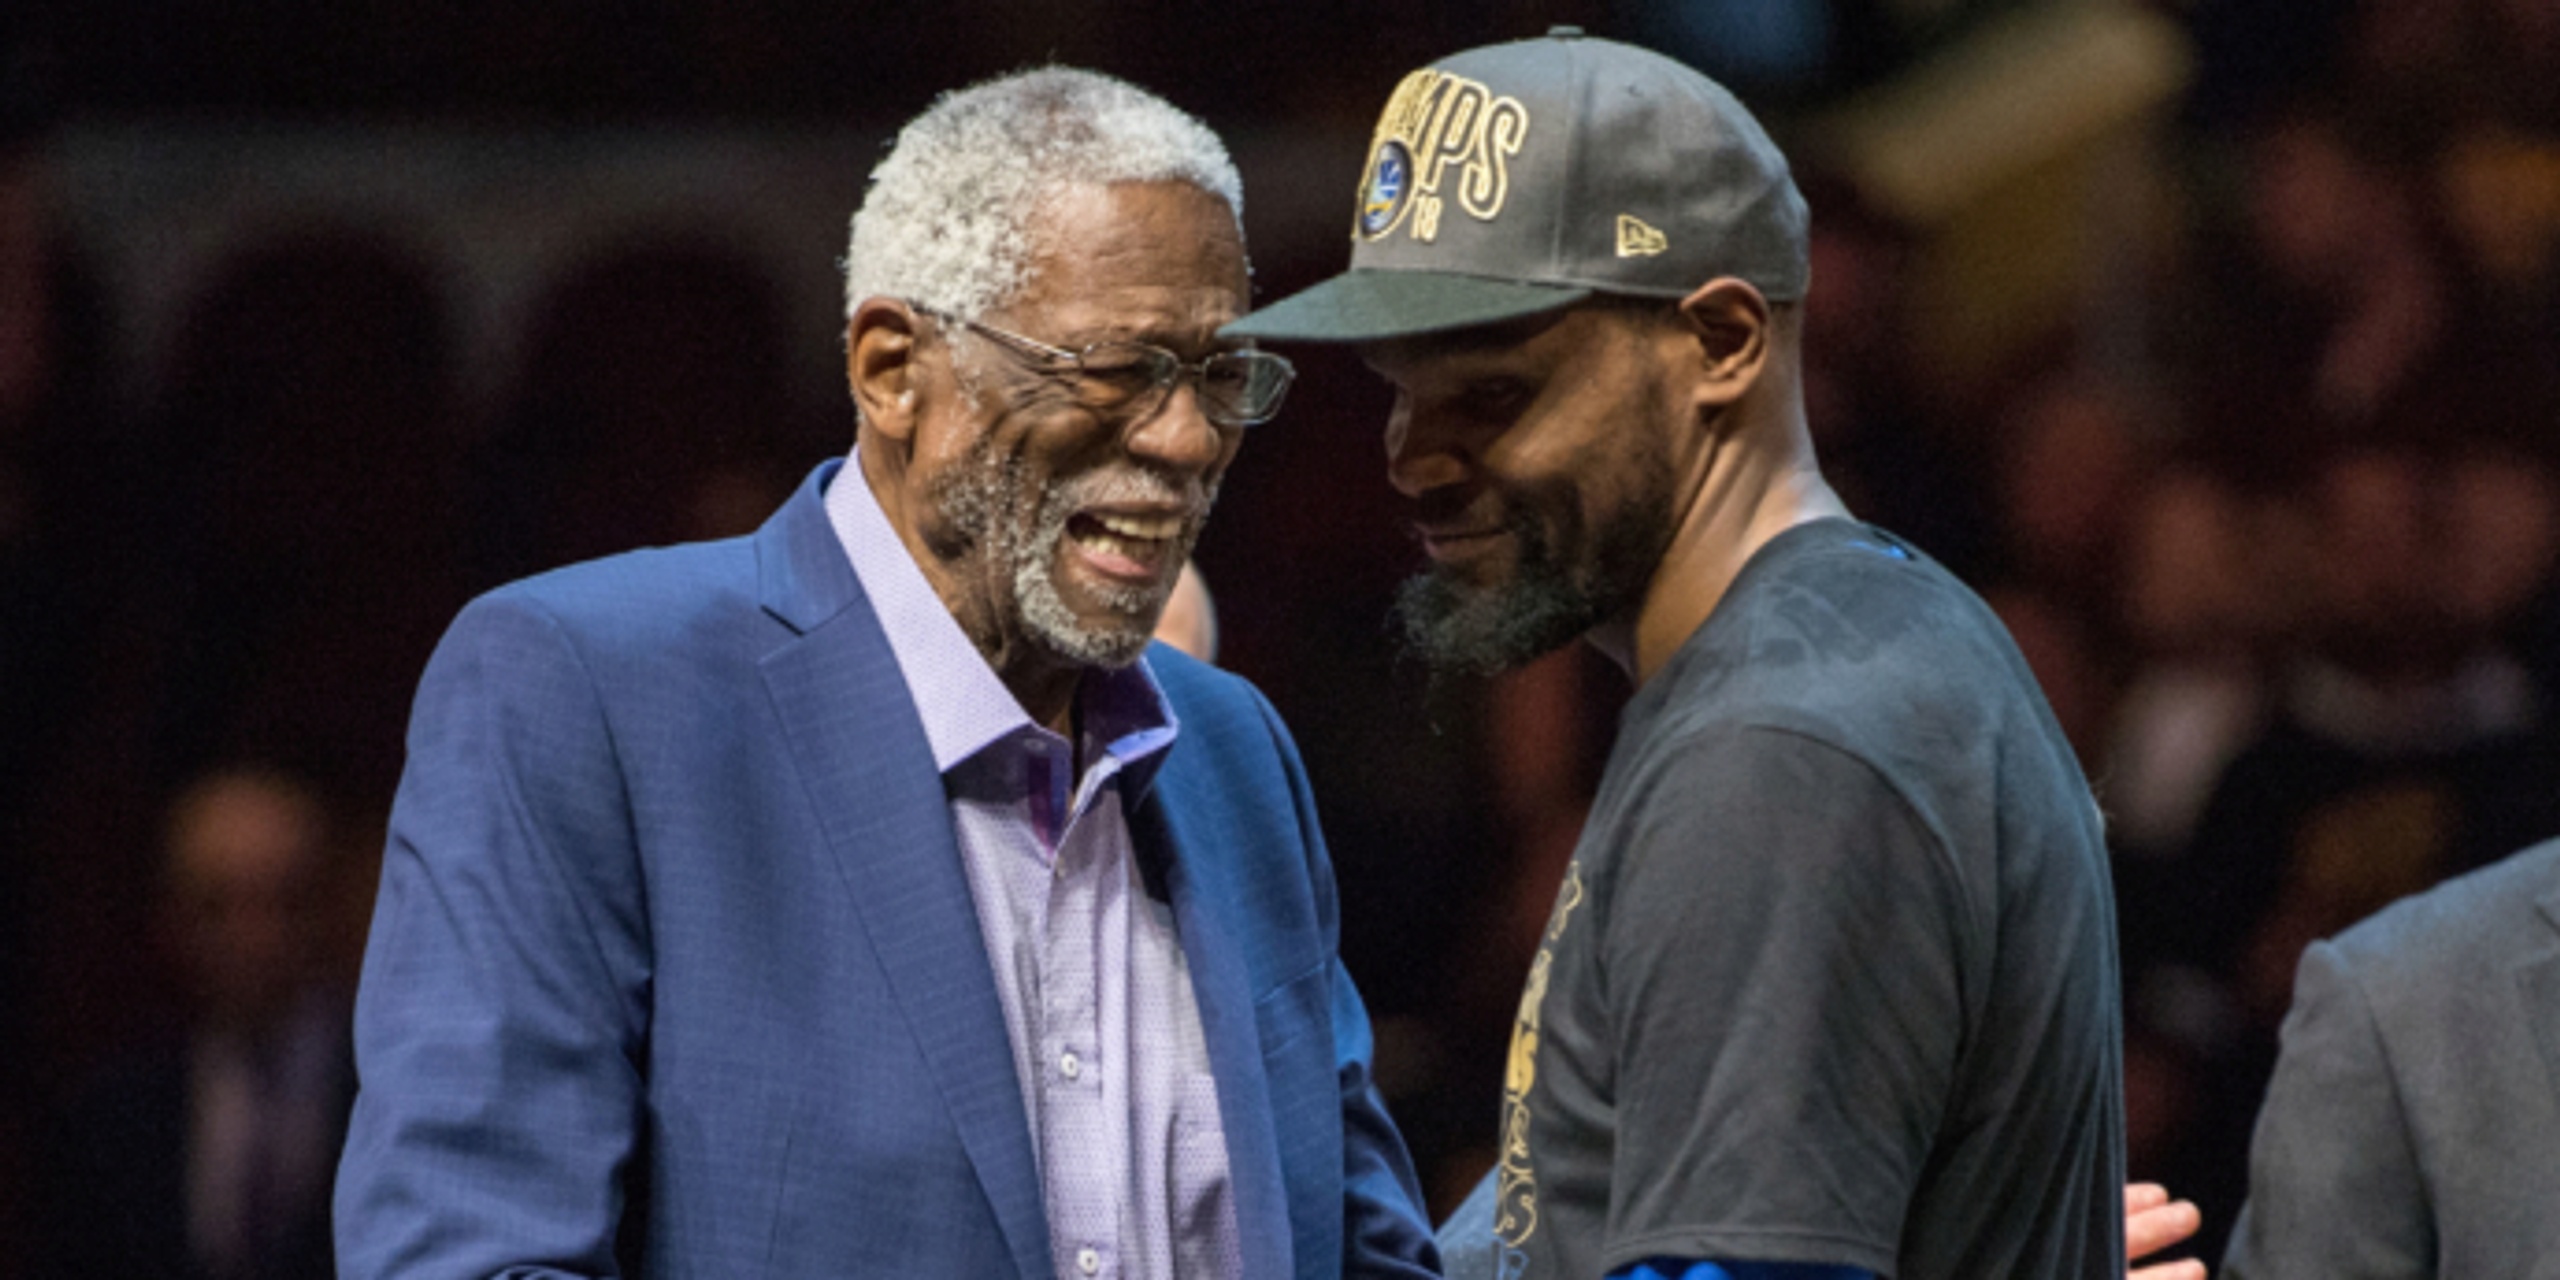 NBA players react, pay tribute to Hall of Famer Bill Russell